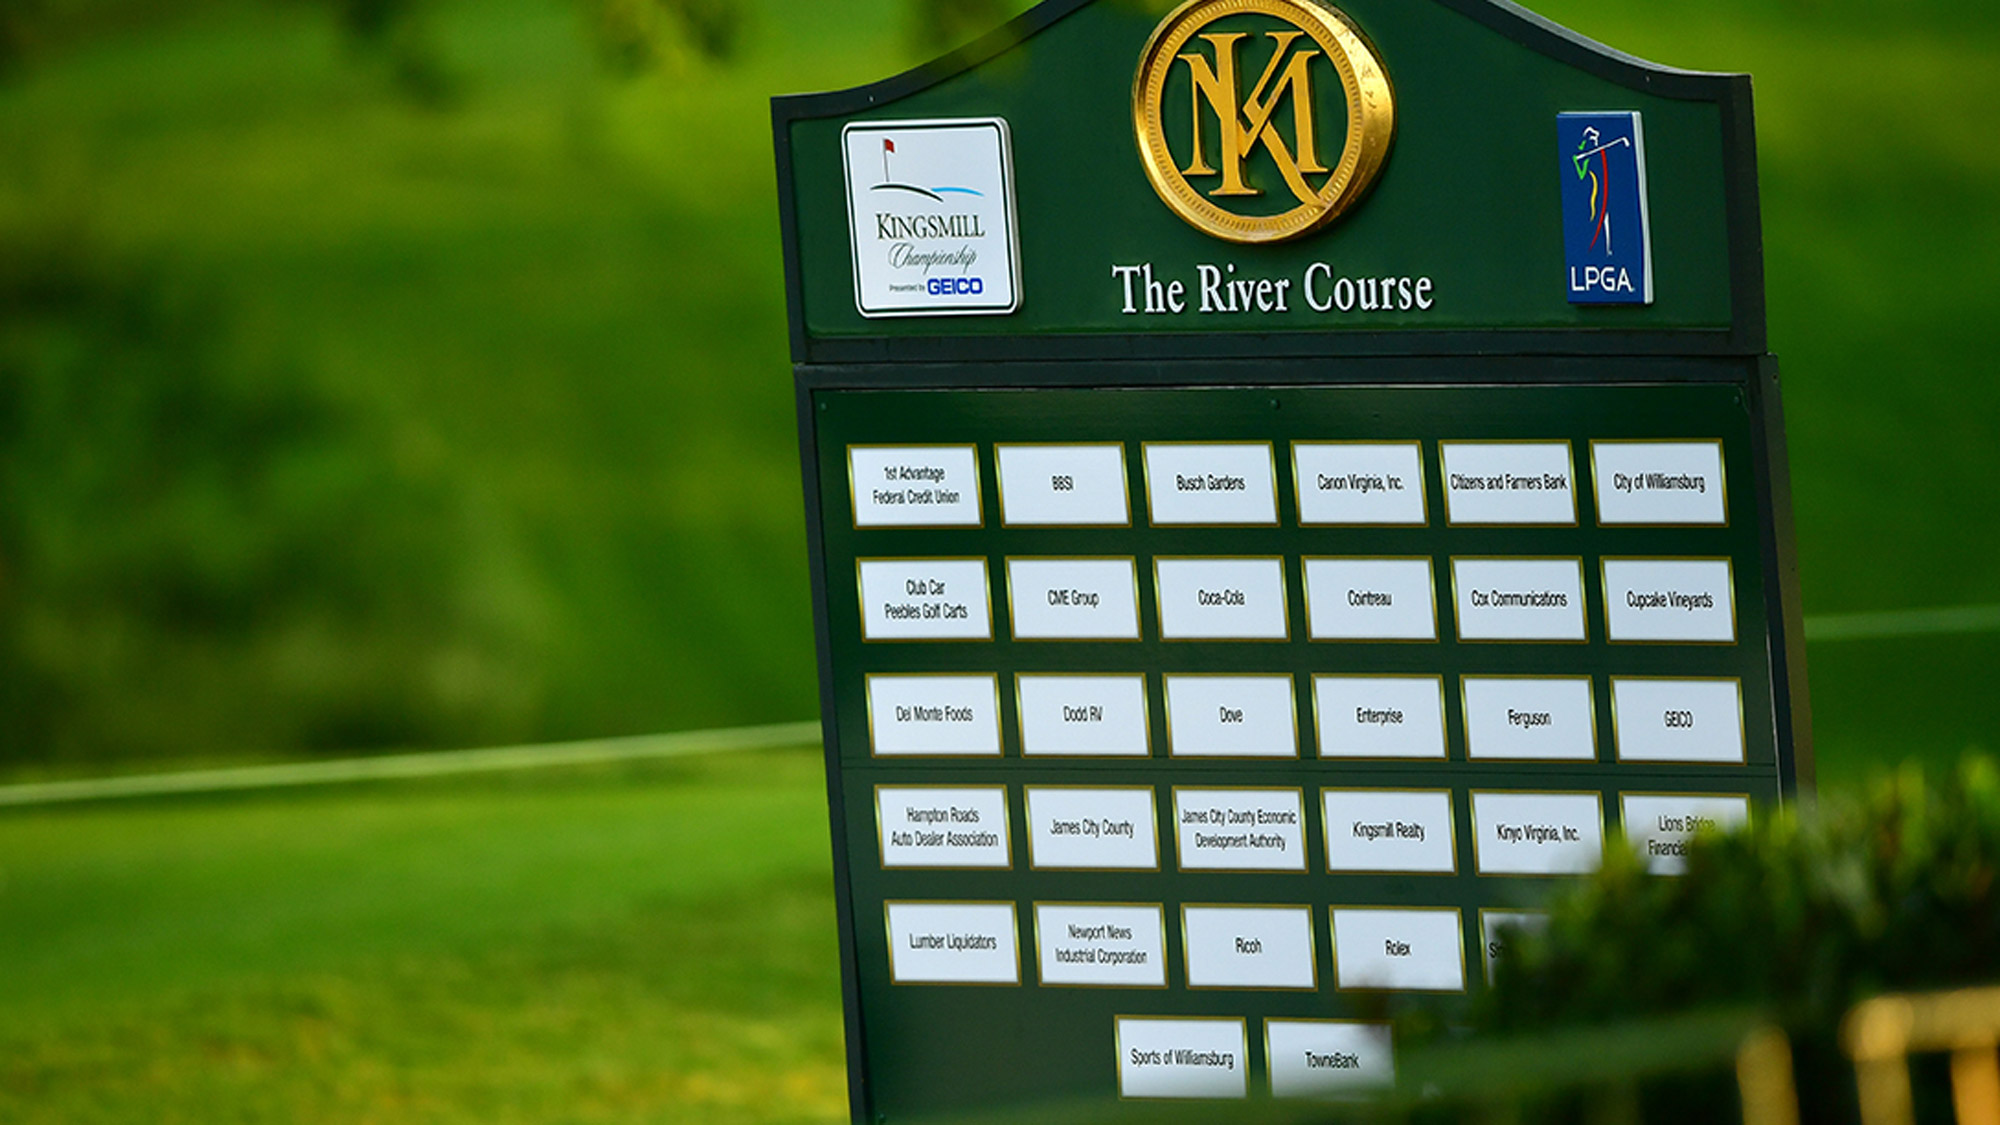 Kingsmill Championship Presented by Geico in Williamsburg